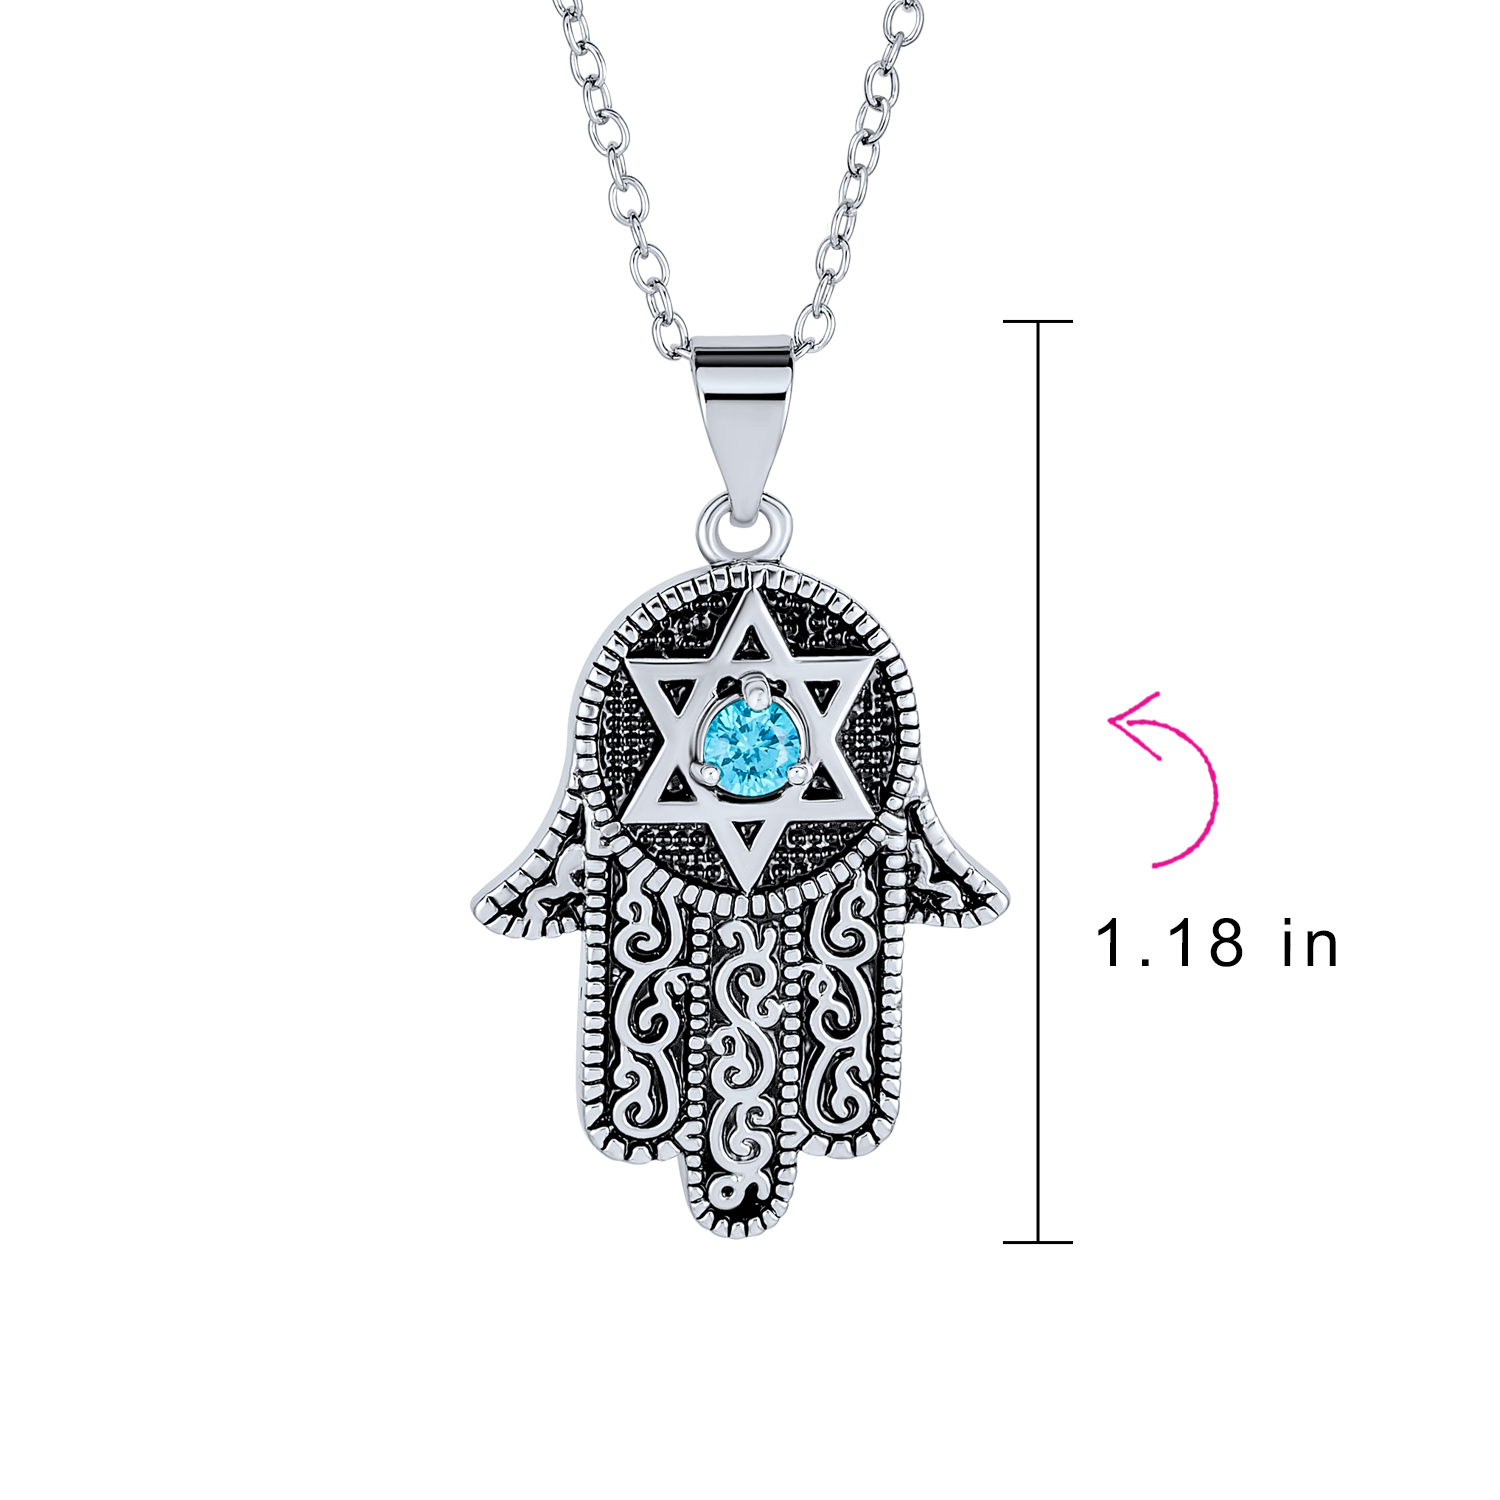 Bling Jewelry Hamsa Hand of God Star of David Pendant Necklace Blue CZ Black Plated - image 4 of 5